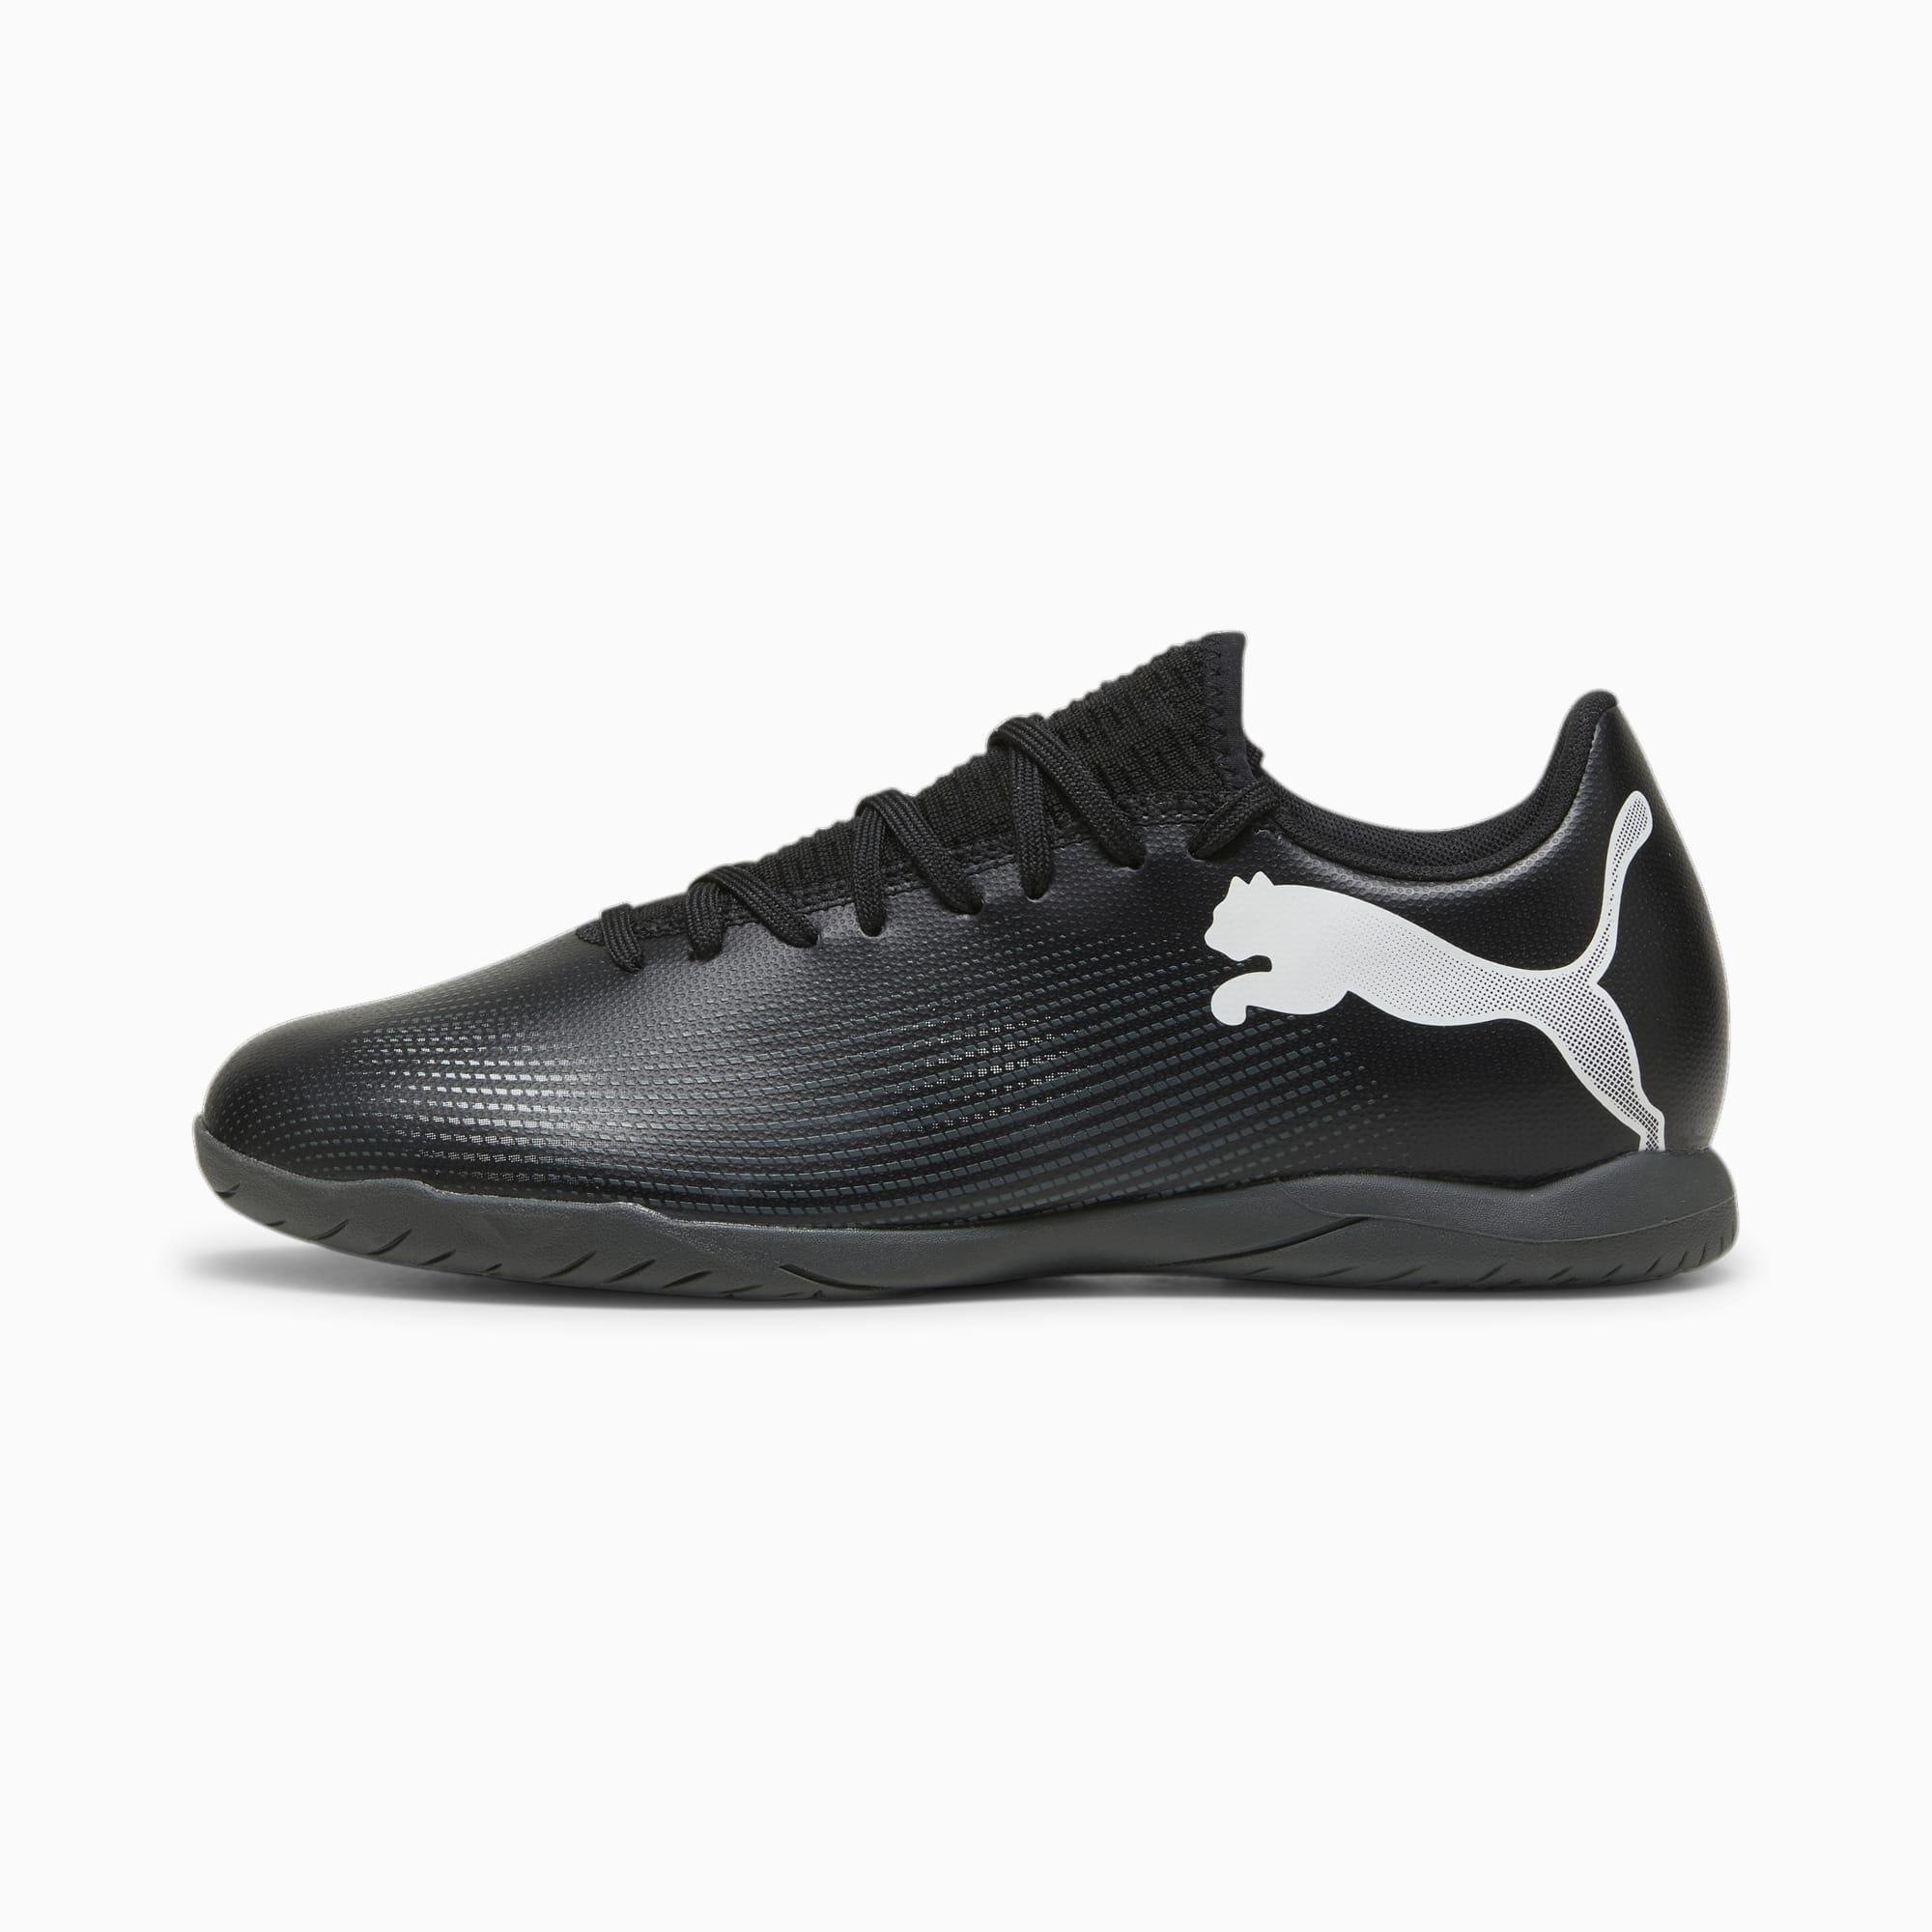 FUTURE 7 PLAY IT Men's Soccer Cleats by PUMA